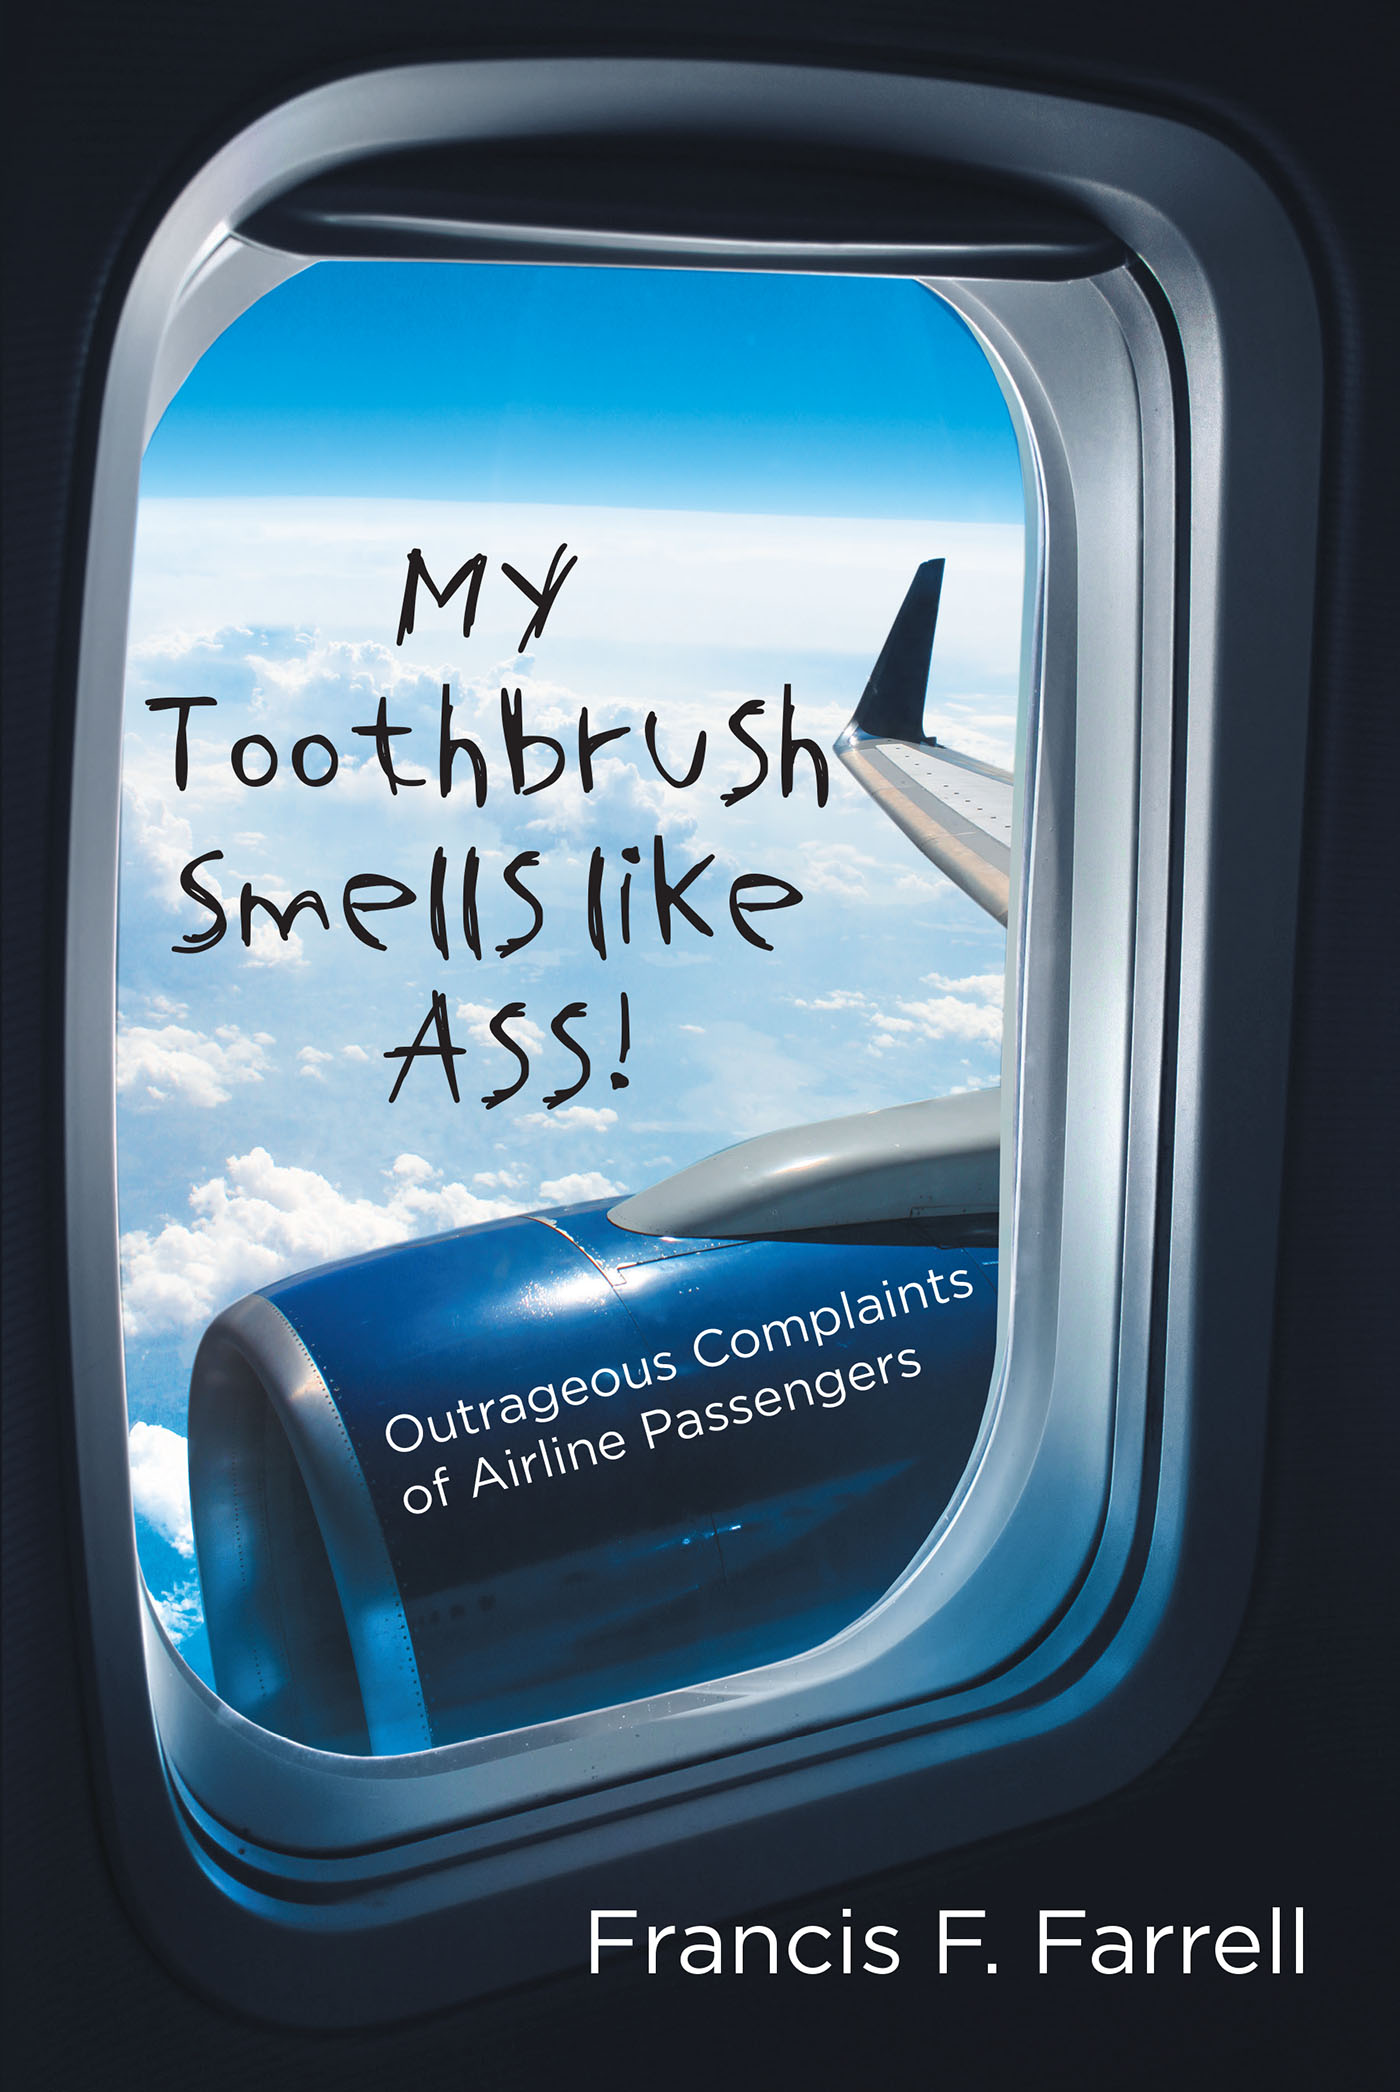 Author Francis F. Farrell’s new book, “My Toothbrush Smells like Ass!” reveals the outrageous and often hilarious complaints of disorderly & entitled airline passengers